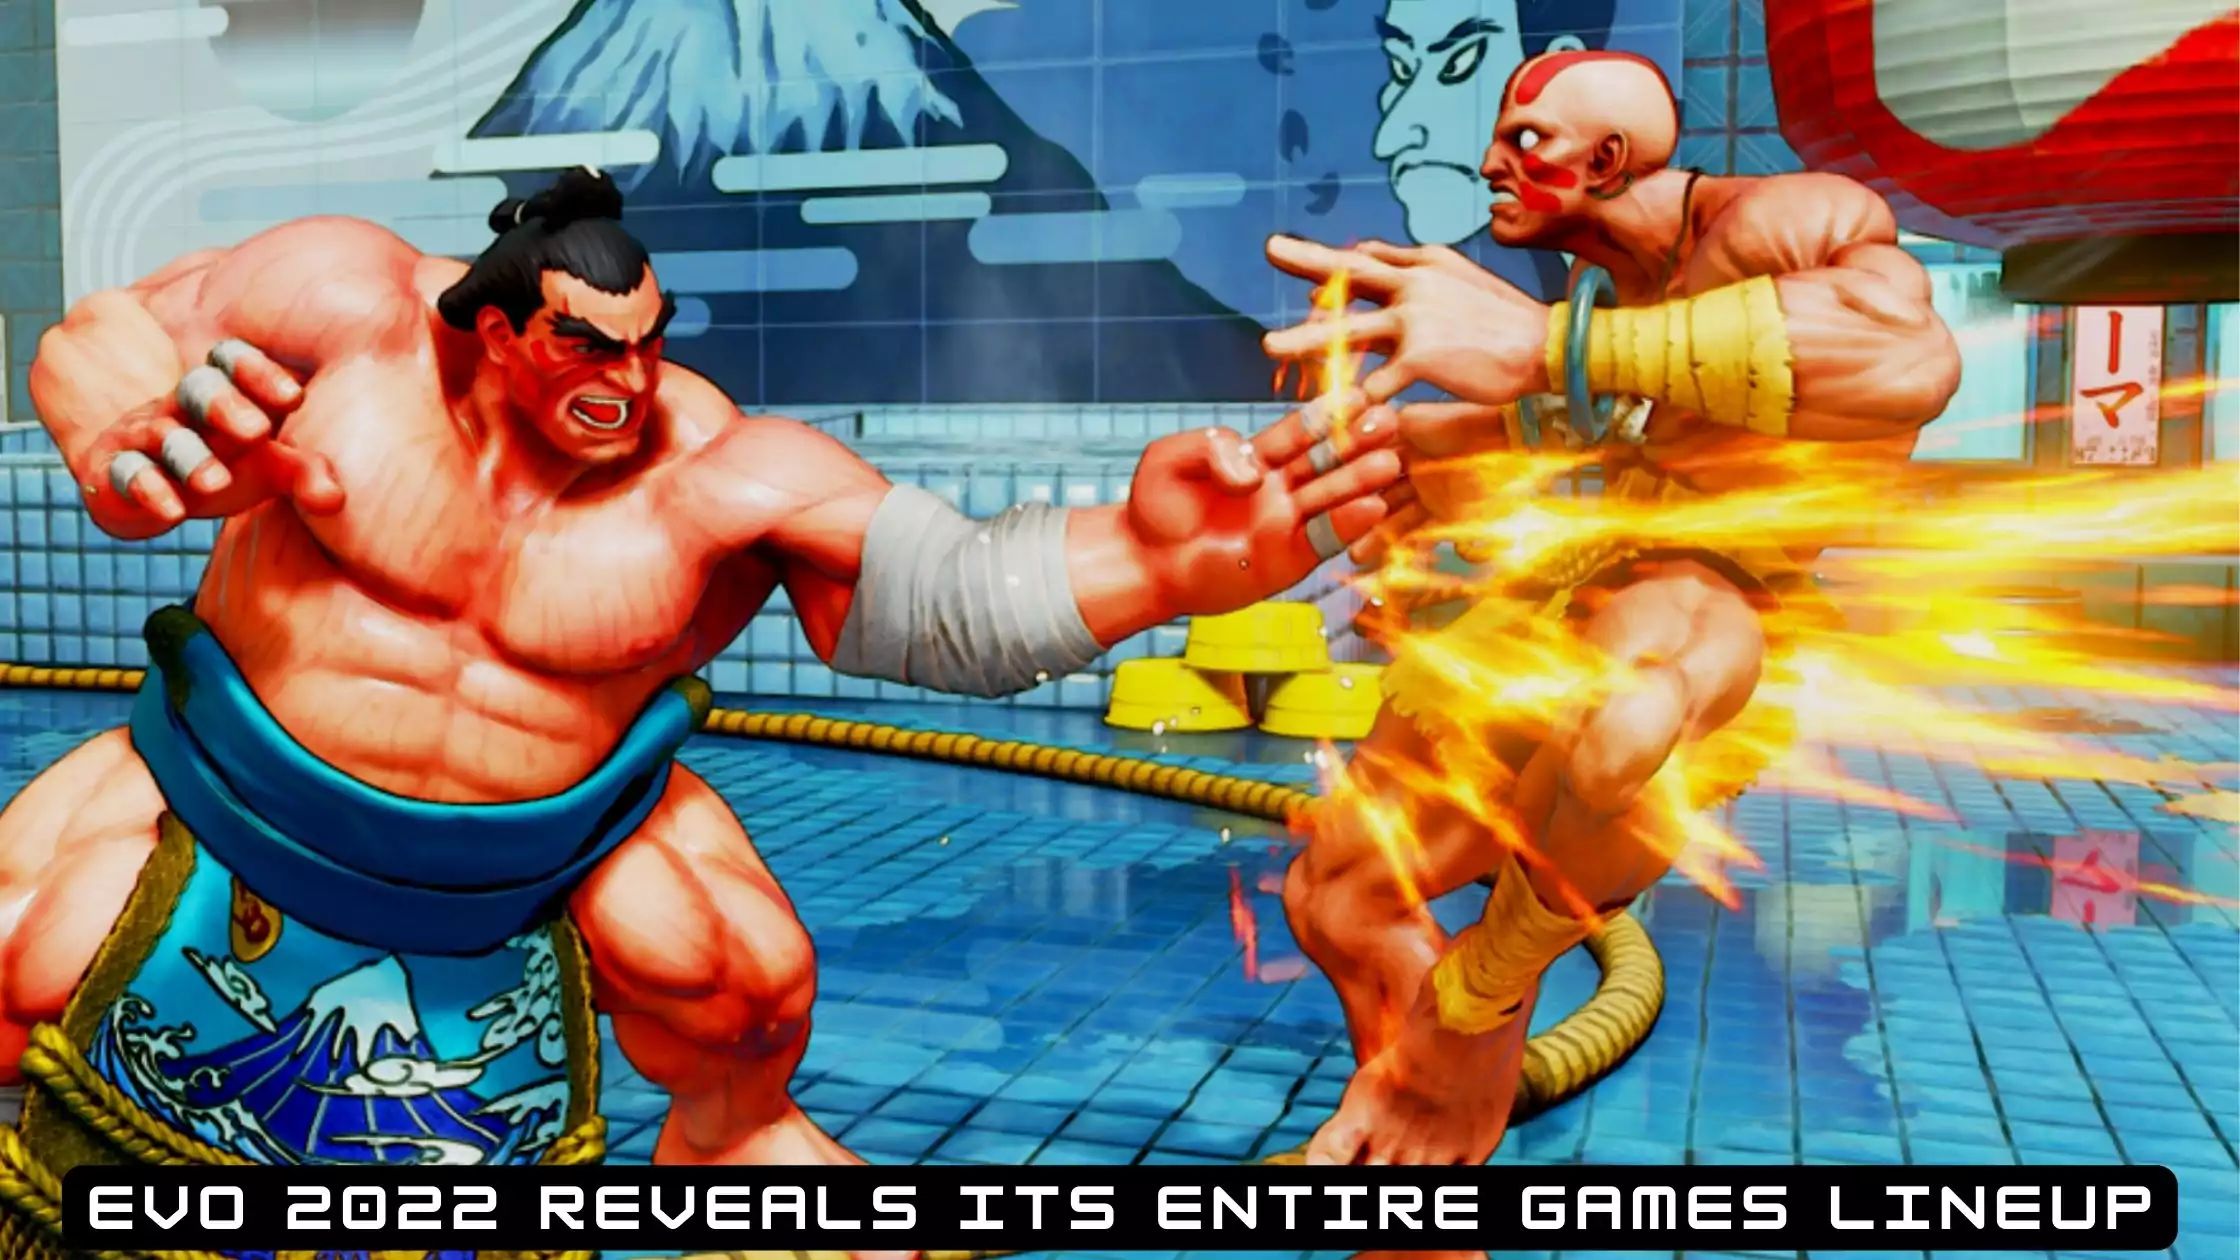 EVO 2022 reveals its entire games lineup